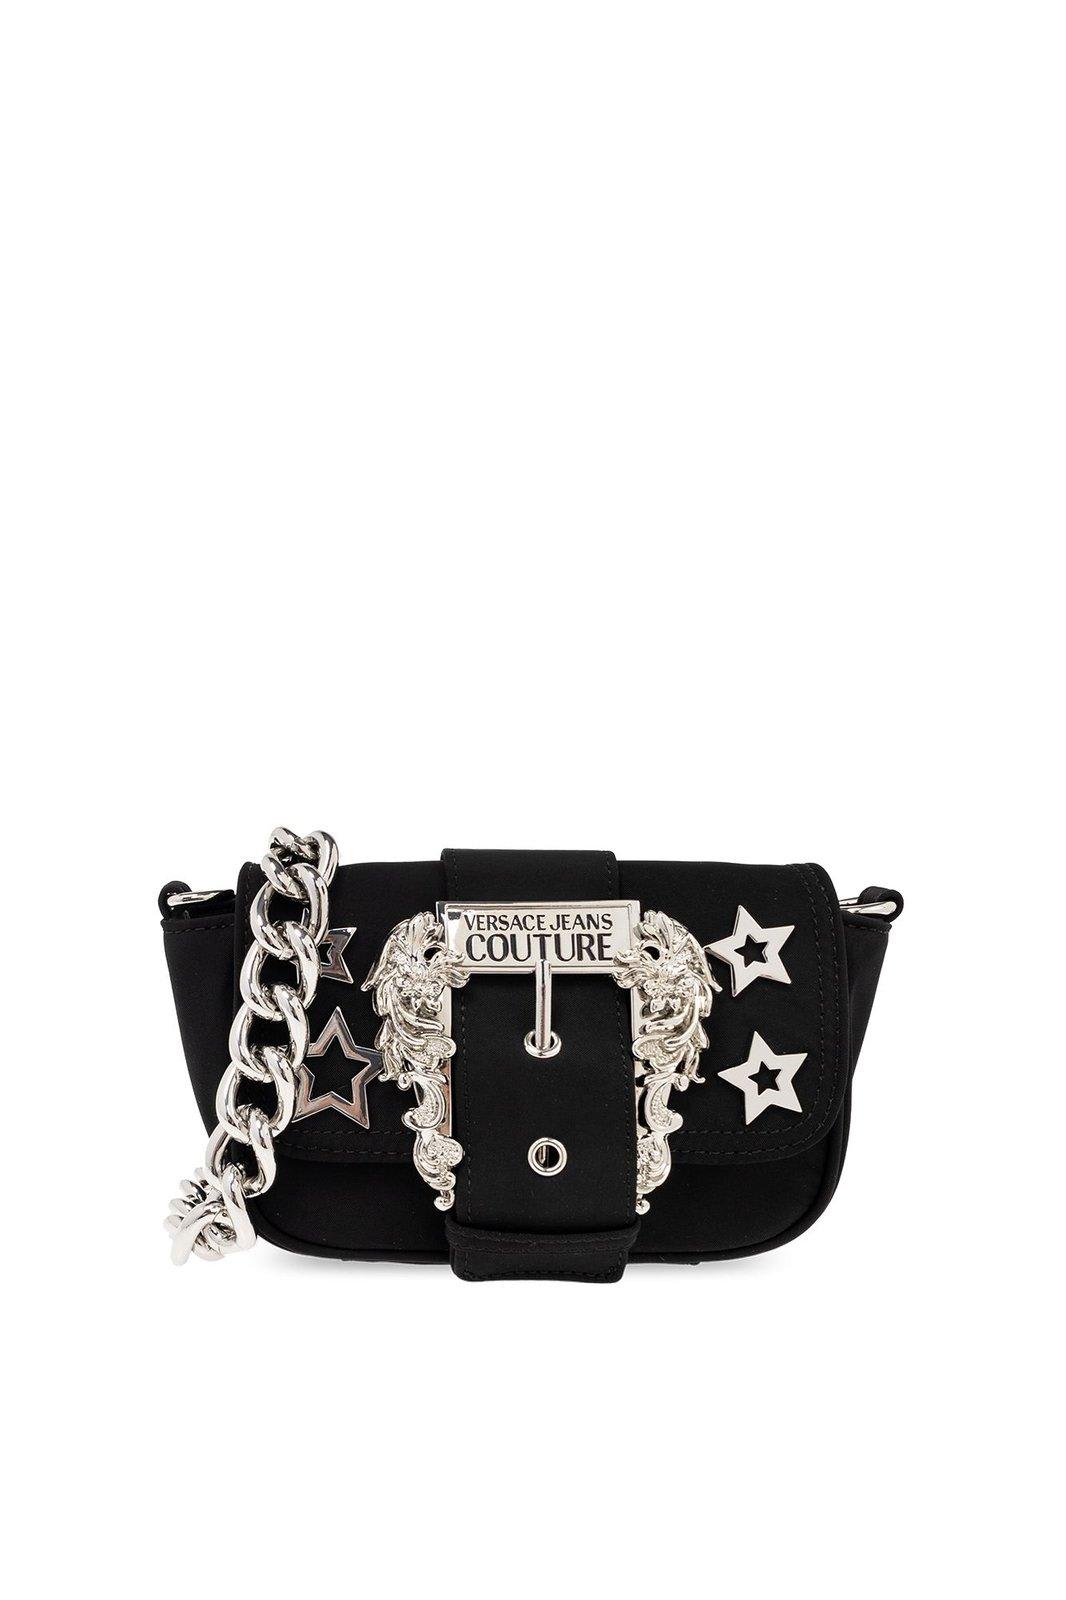 VERSACE JEANS COUTURE BAROQUE-BUCKLED SMALL SHOULDER BAG